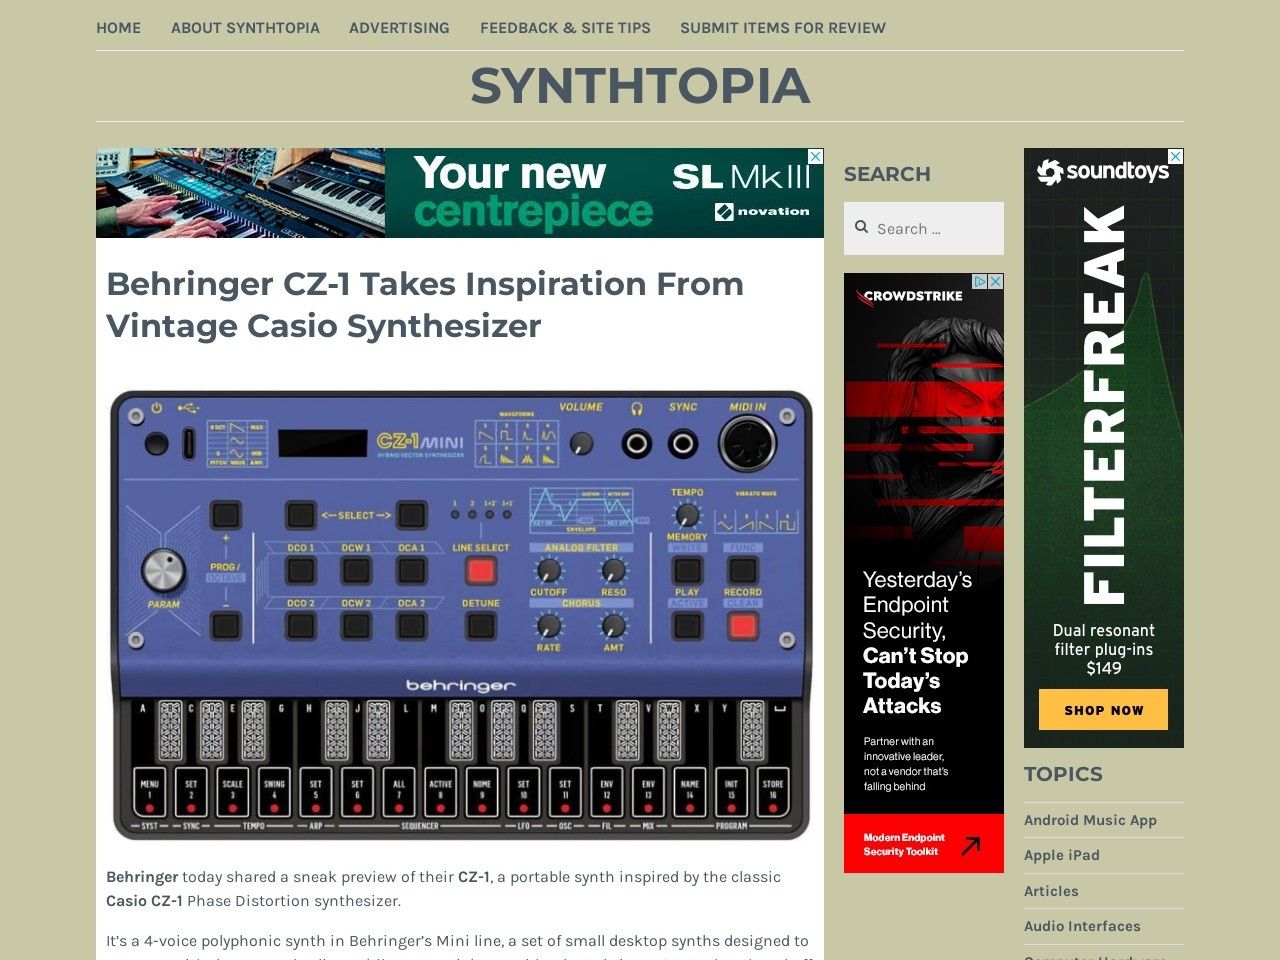 Behringer CZ-1 Takes Inspiration From Vintage Casio Synthesizer – Synthtopia